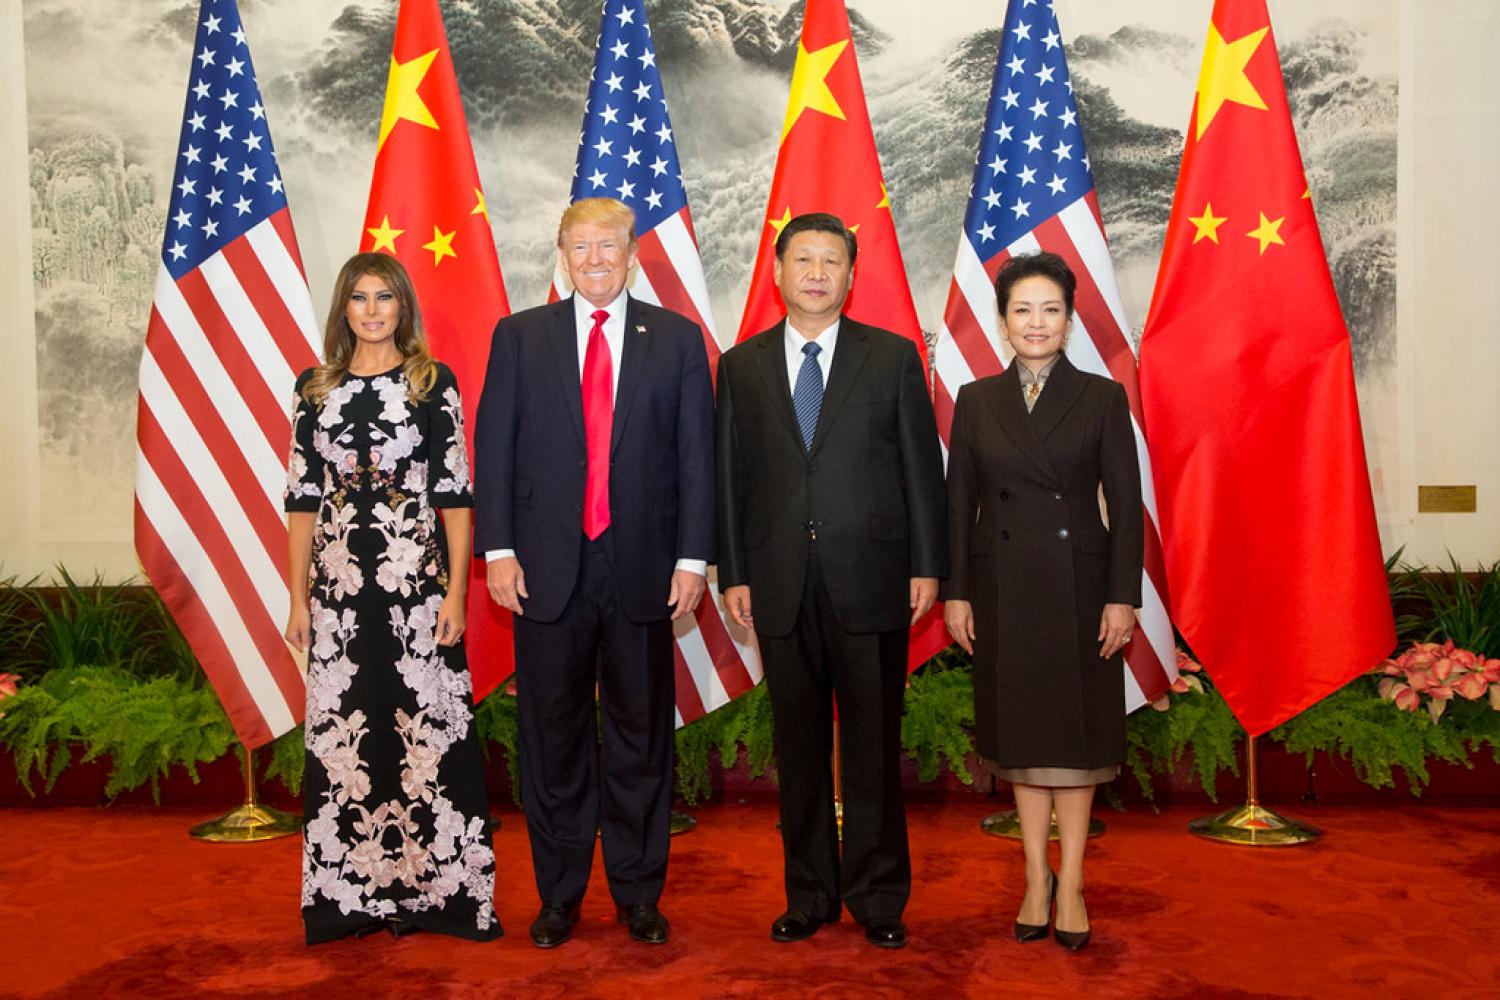 President Trump with President Xi and their wives on his official visit to Beijing in November 2017. (Photo: The White House)